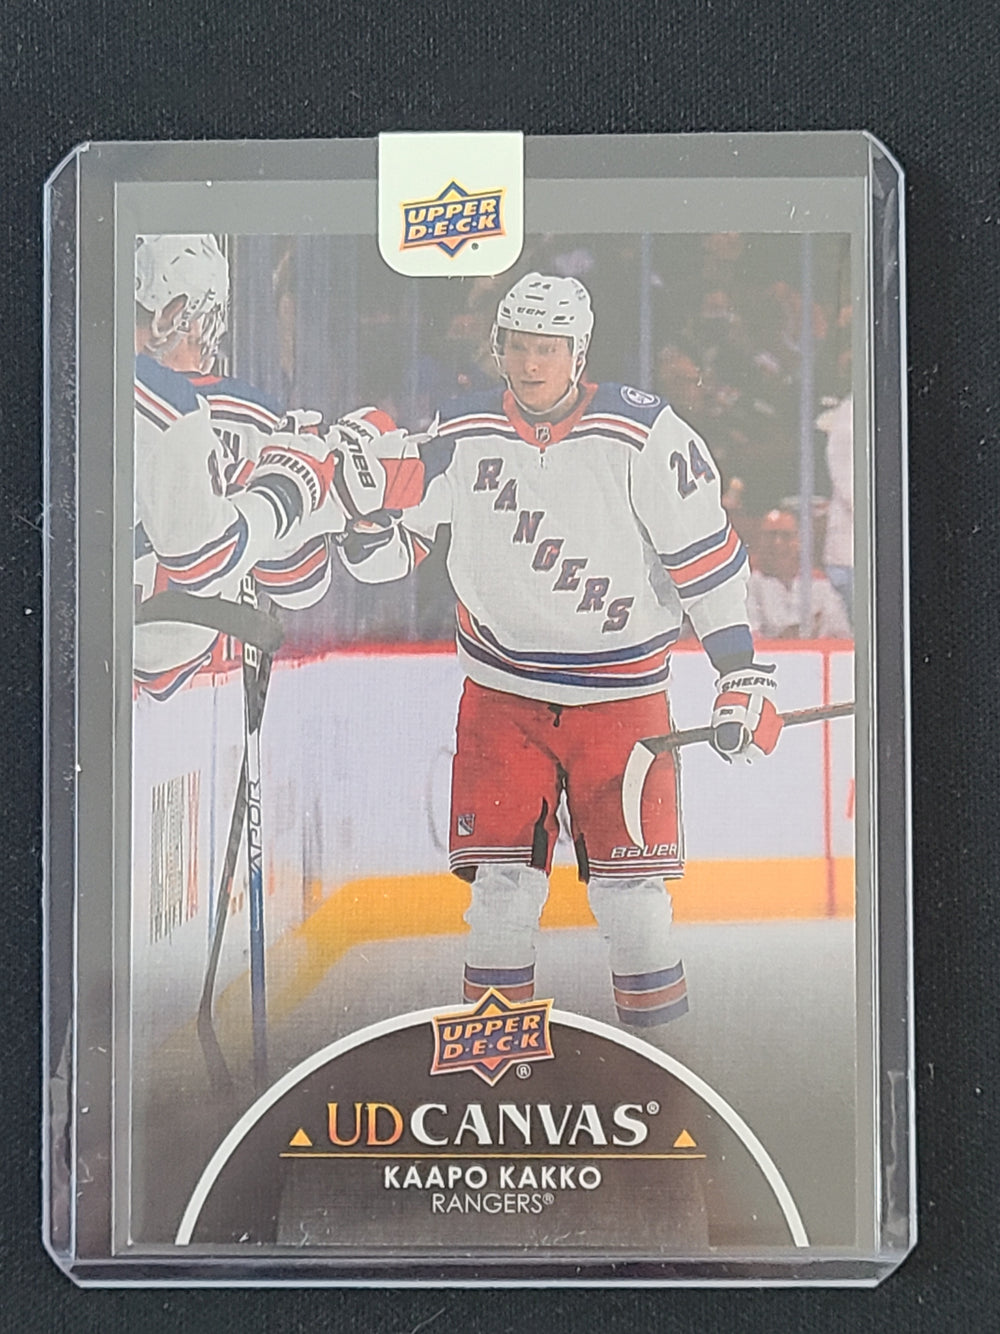 2021-22 Upper Deck Extended Canvas Black Parallel #C323 Kaapo Kakko NY Rangers UD Seal *Brand New*